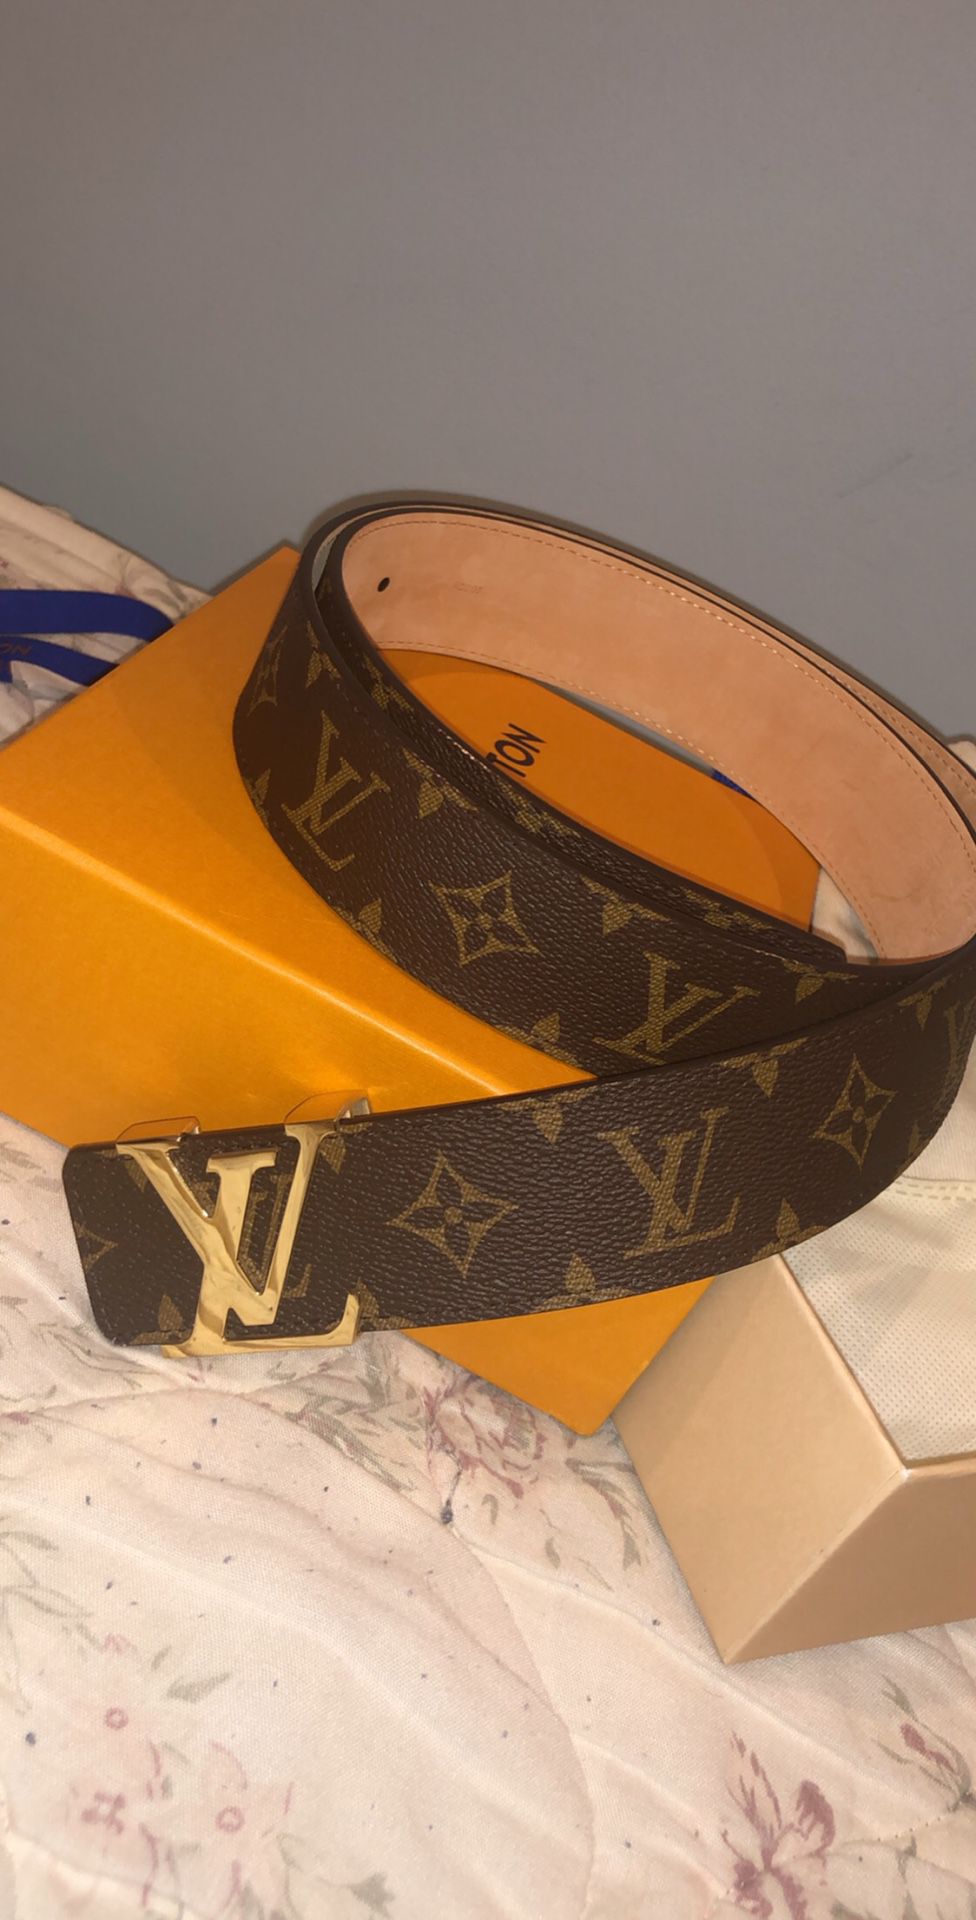 Men's LV Louis Vuitton Belt BRAND NEW Size 42 for Sale in San Mateo, CA -  OfferUp